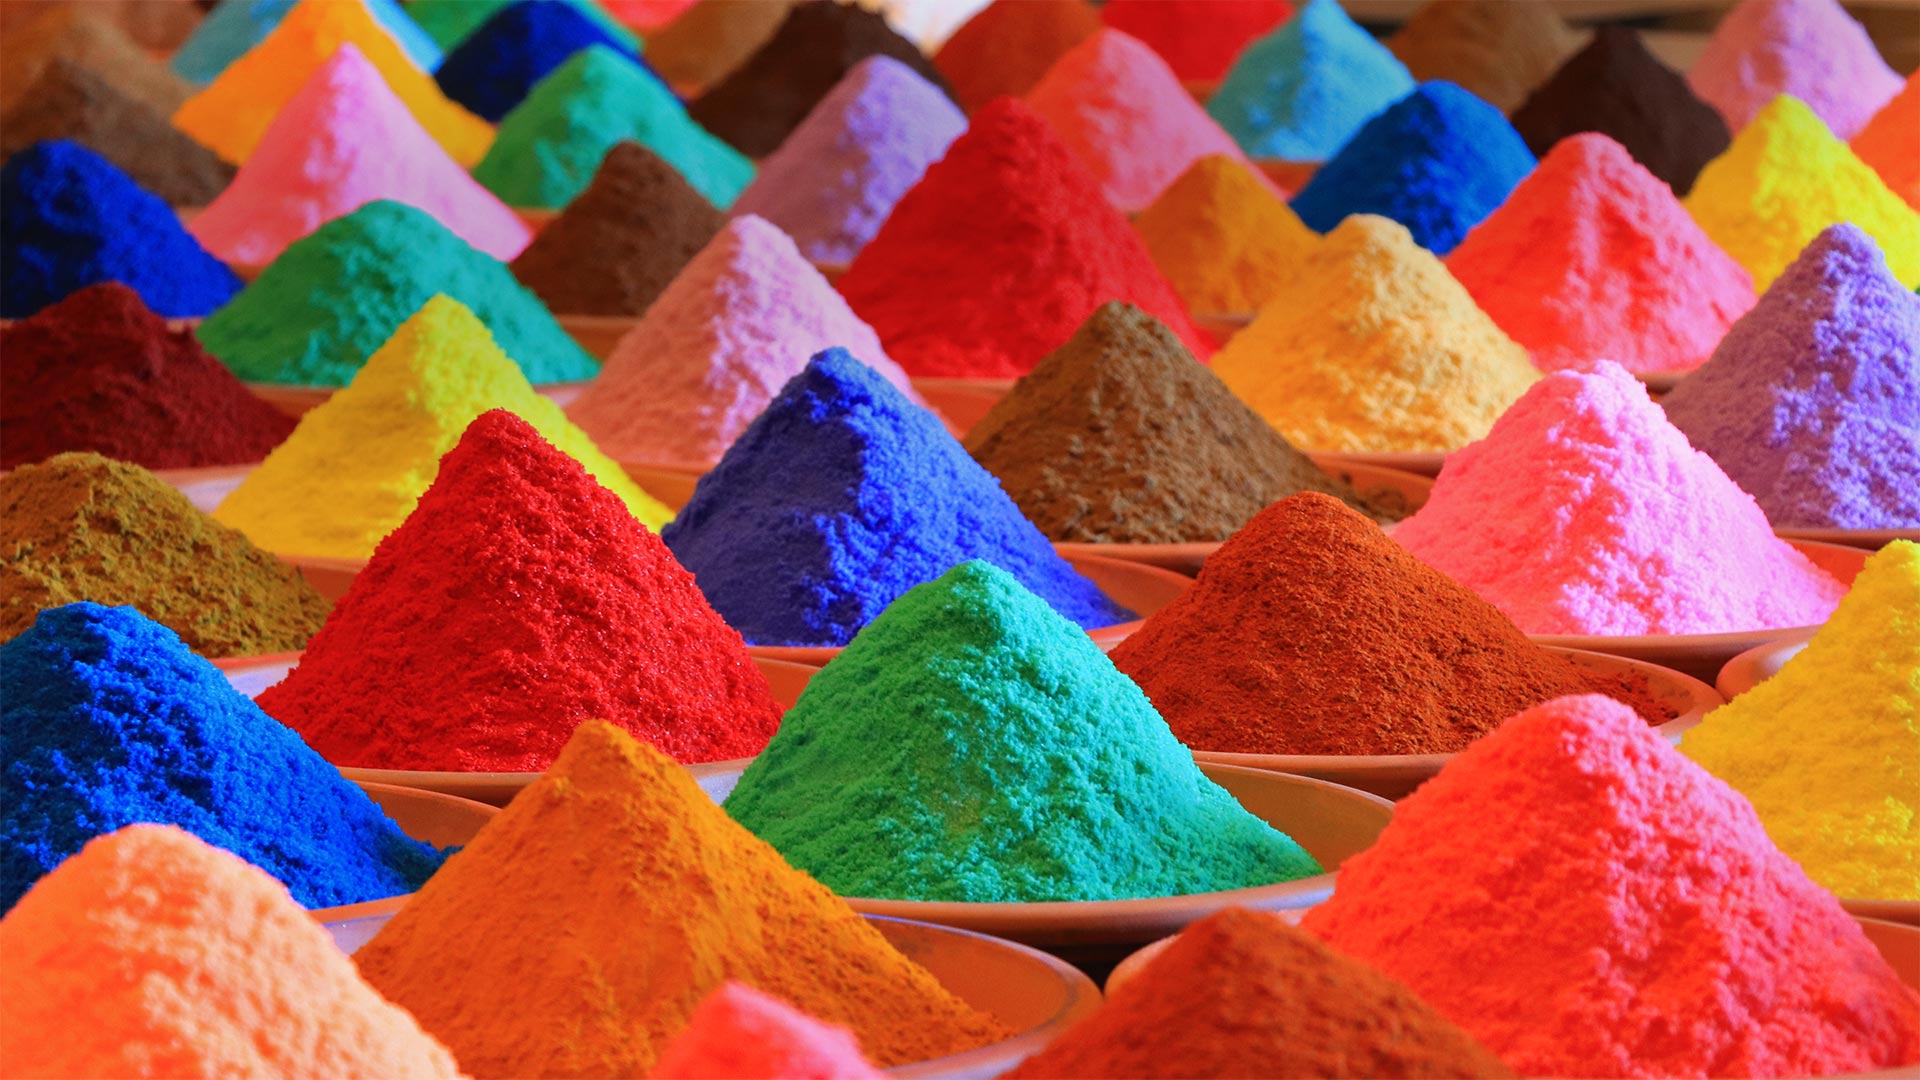 Multicolored powders for sale during Holi - Nuno Valadas/Getty Images)